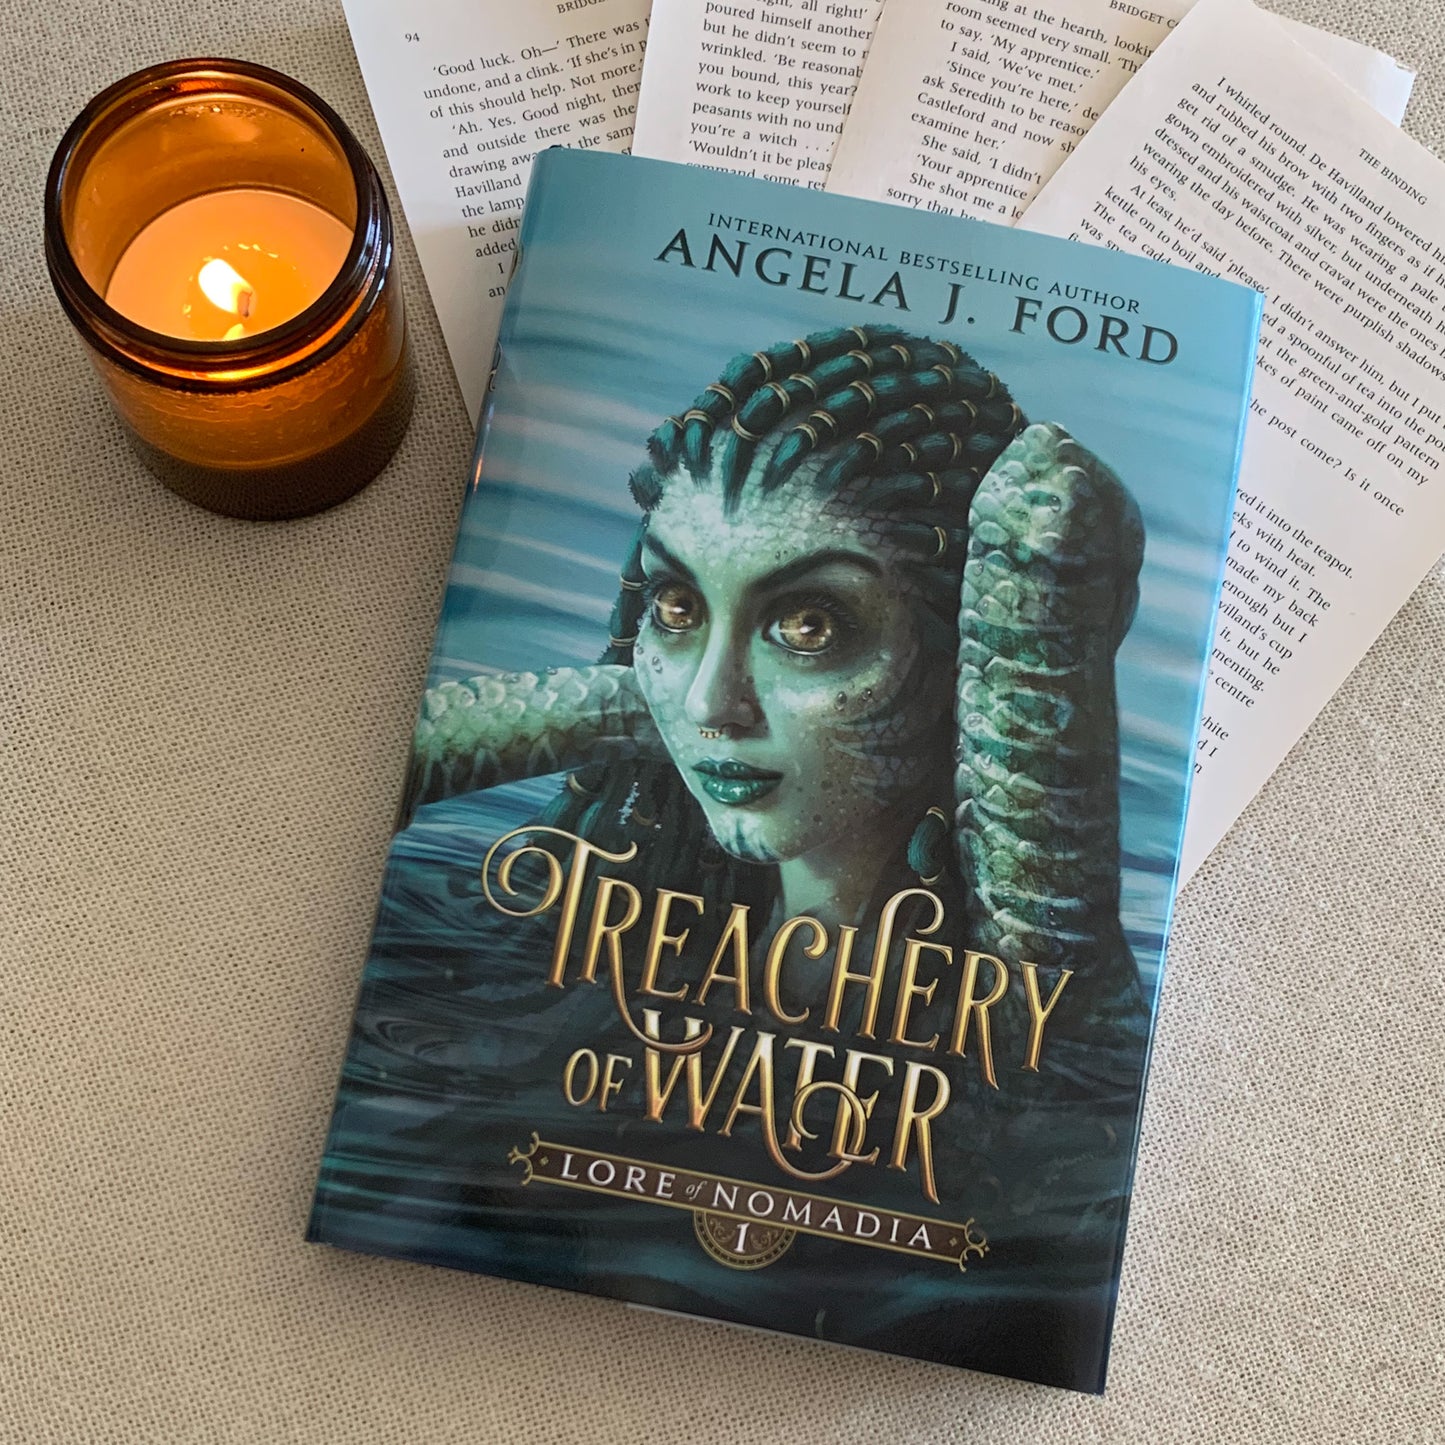 Treachery of Water (Lore of Nomadia #1) - Hardcover by Angela J. Ford